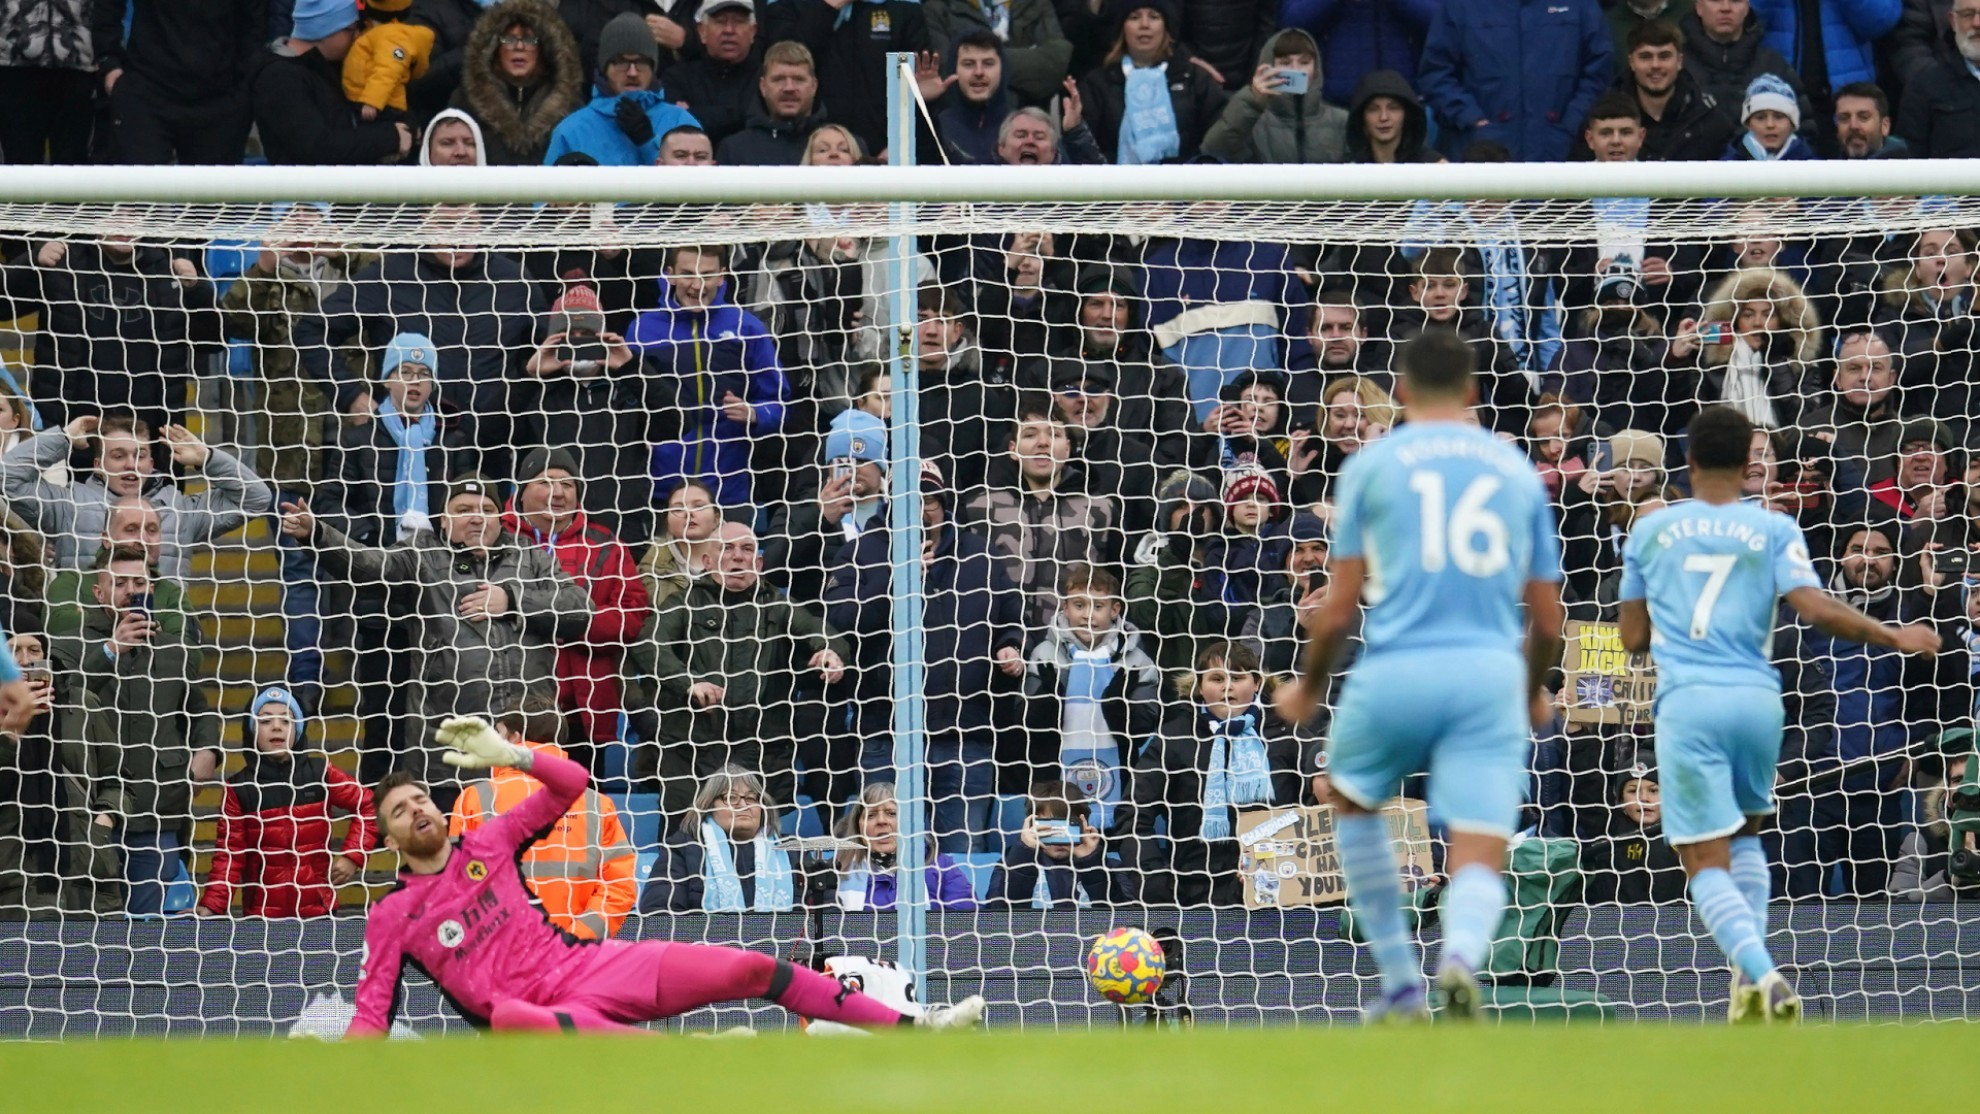 Manchester City stay top thanks to Sterling's decisive penalty against Wolves